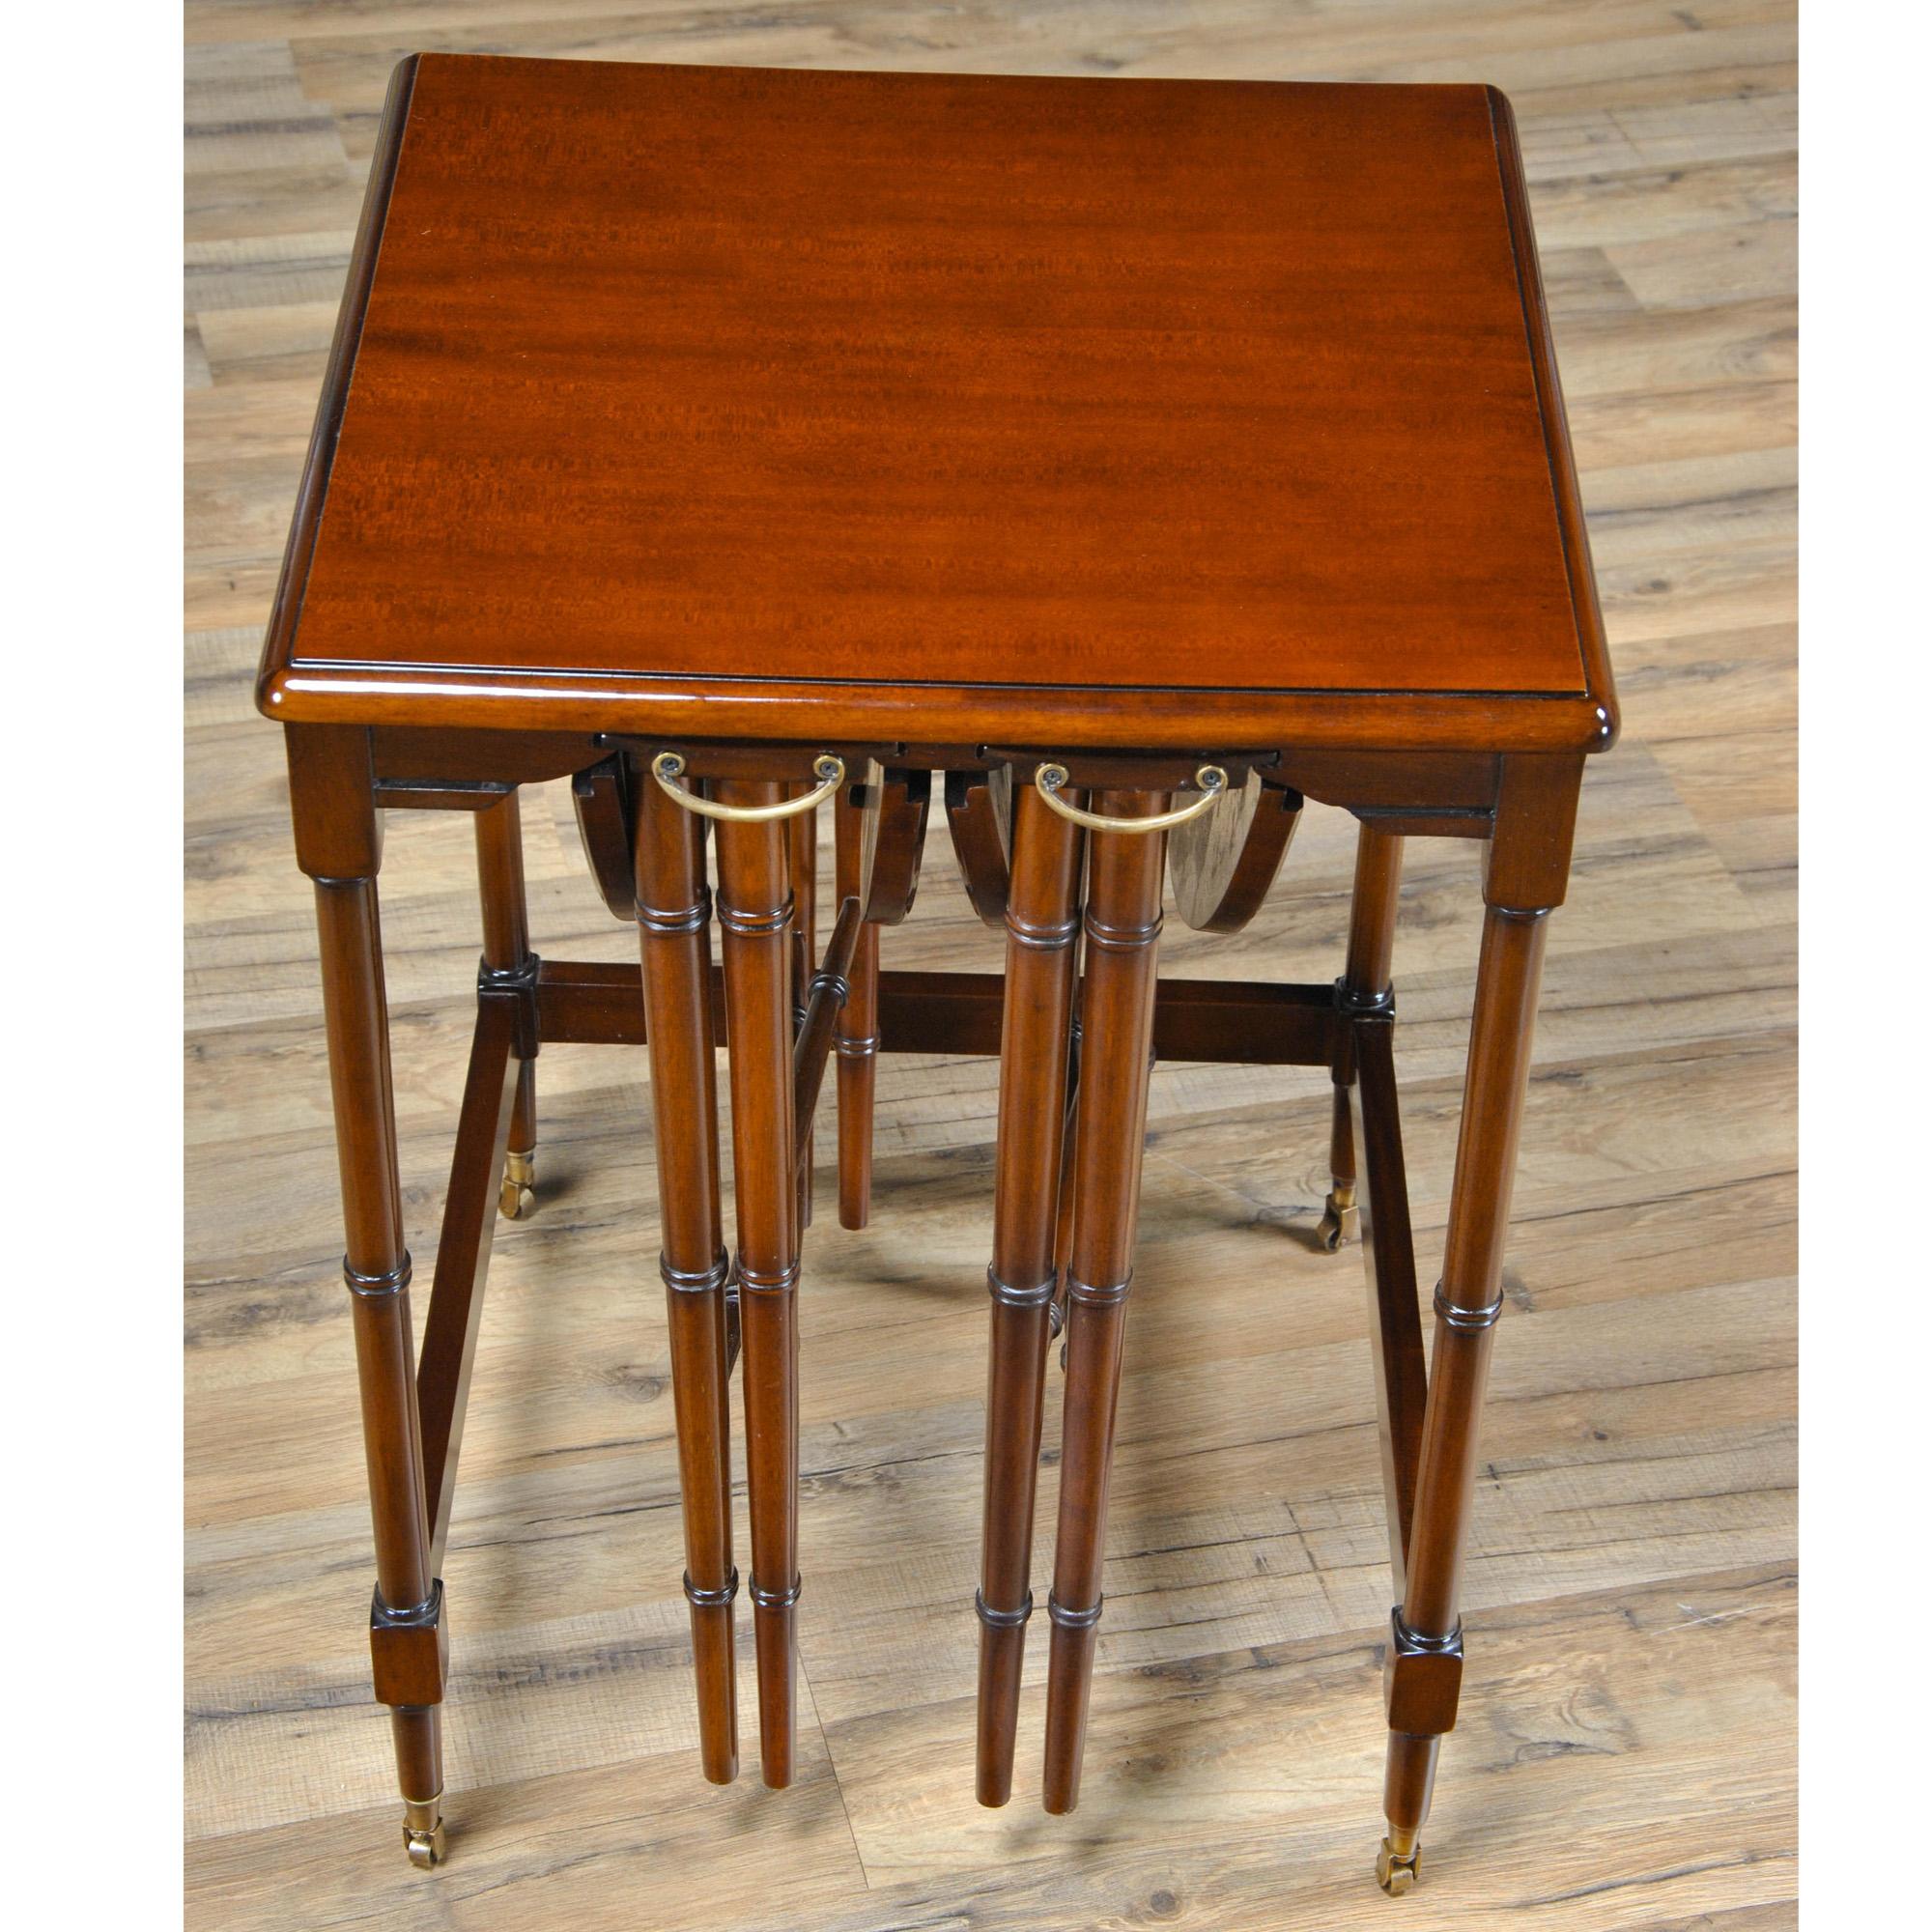 An ingenious set of three Tall Nesting Tables that stores the two smaller end tables underneath the largest table. The smaller tables unfold and open up and can be used on sturdy, solid mahogany legs which are fashioned in a faux bamboo pattern.